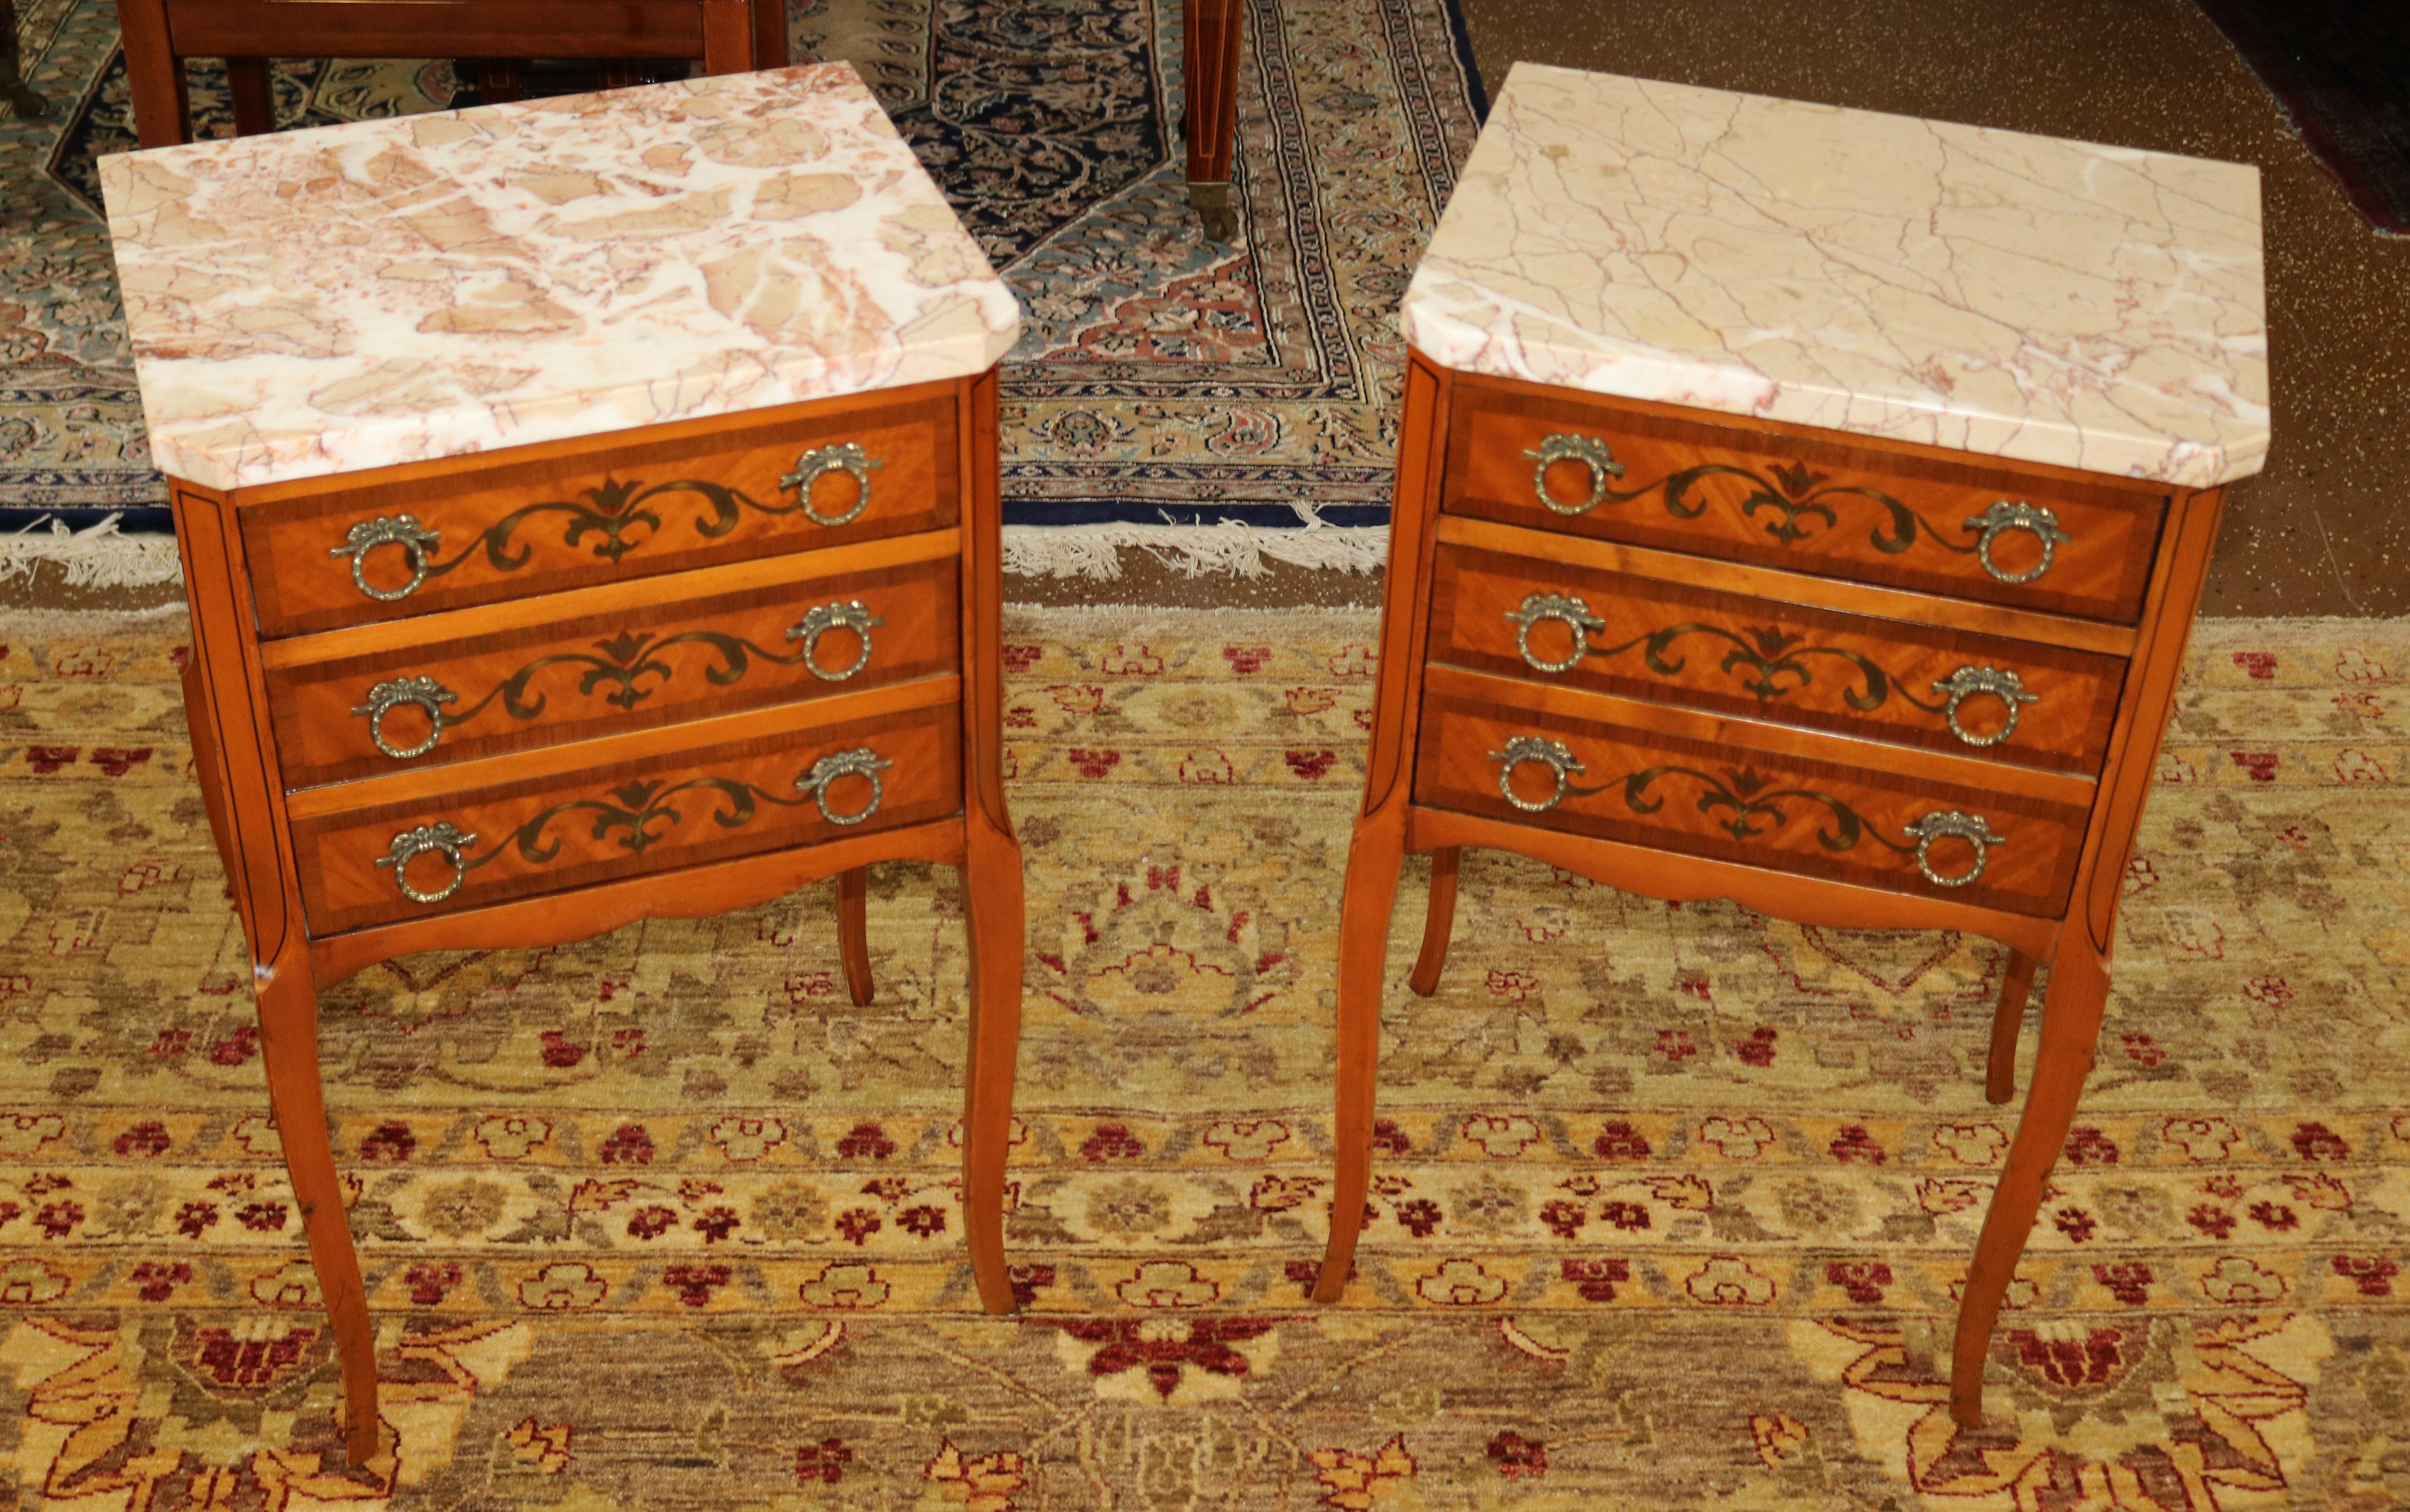 Gorgeous Pair of French Louis XV Style Satinwood Marble Top Nightstands

Dimensions : 17